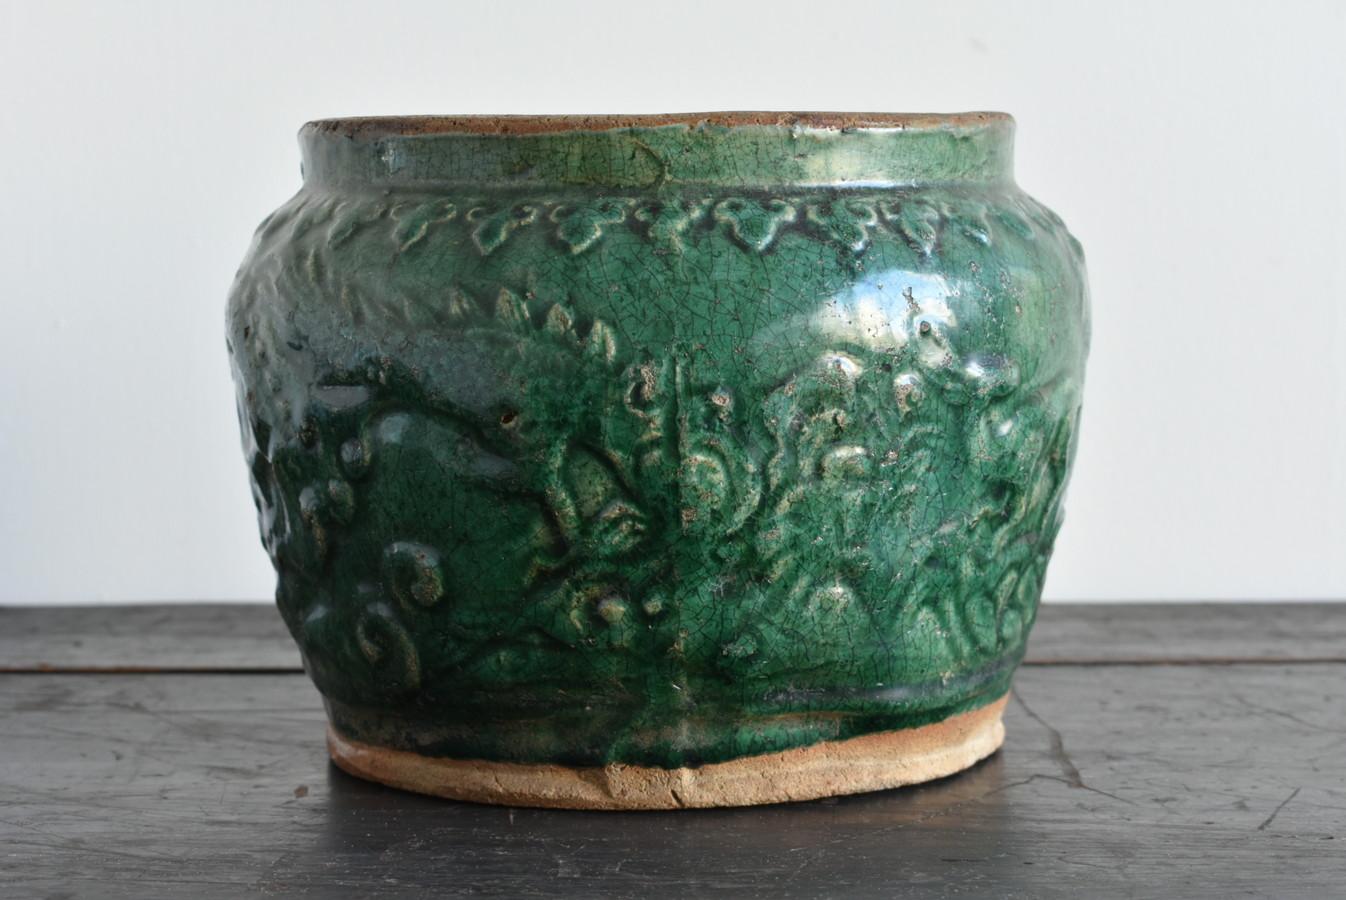 Old Vietnamese pottery with a very beautiful green glaze.
It was made roughly between the 17th and 18th centuries.
Various designs of pottery were made in Vietnam, but most of them were made in imitation of Chinese designs.
This pottery is also